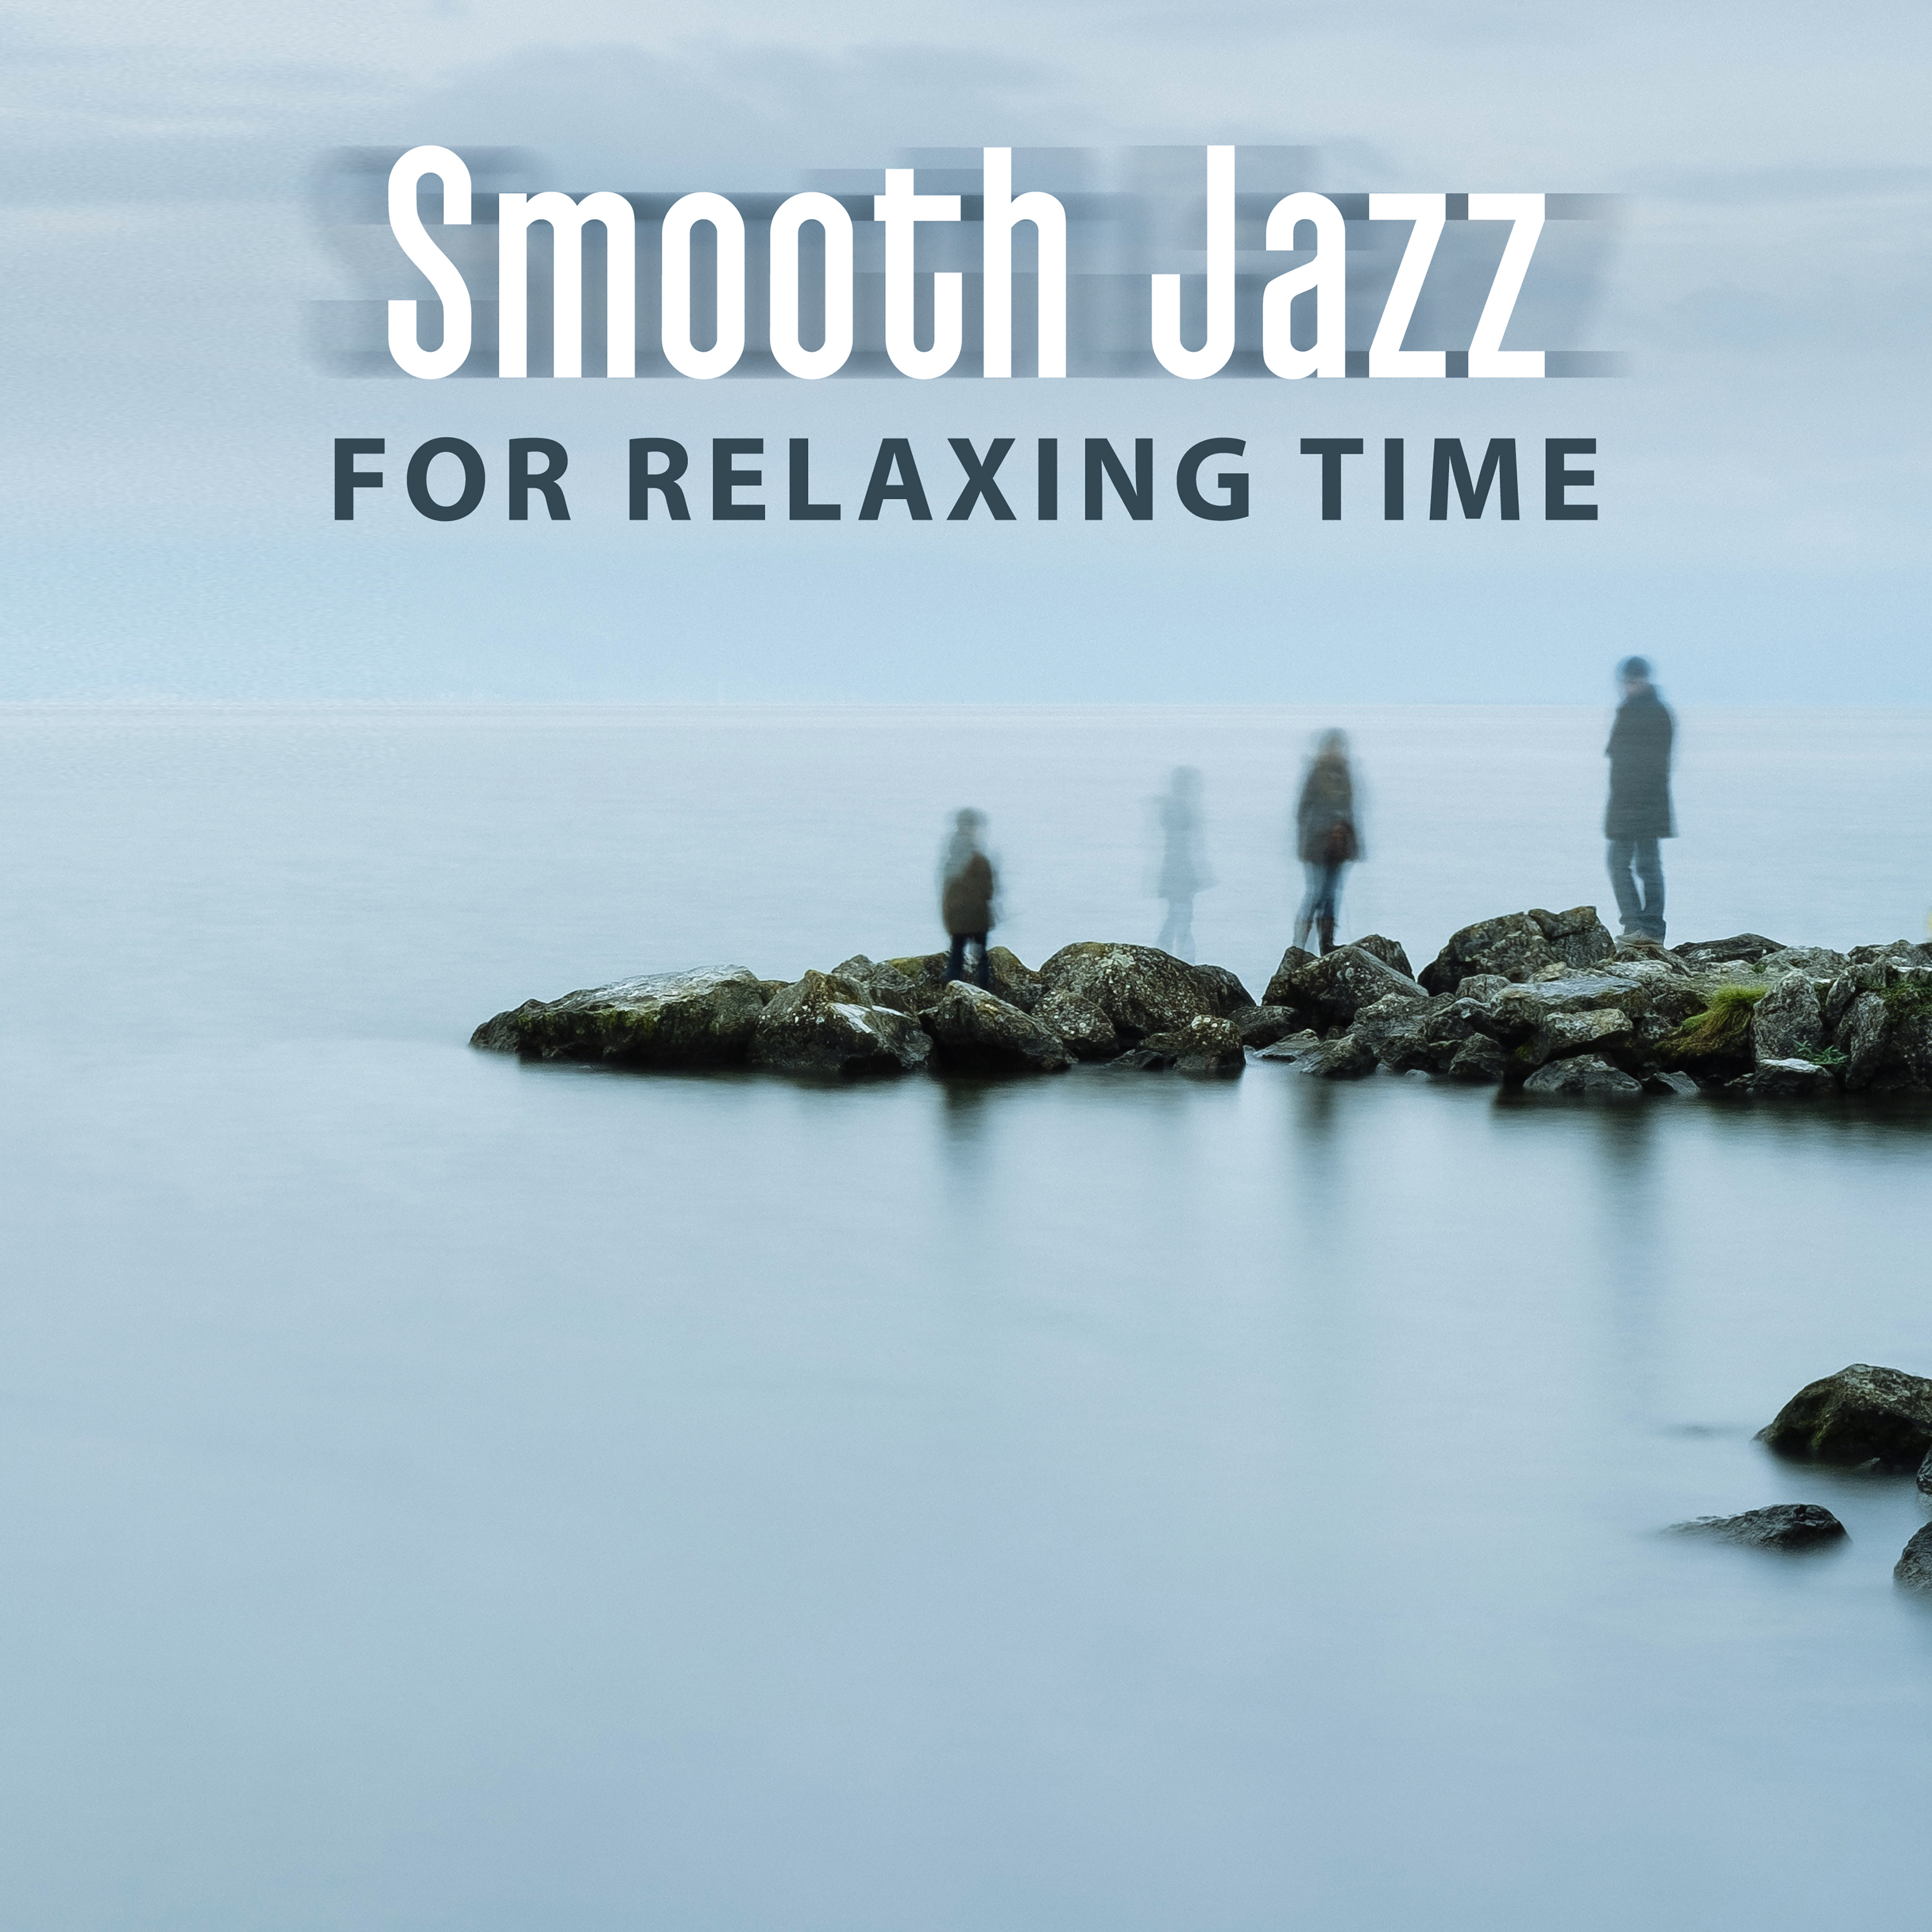 Smooth Jazz for Relaxing Time  Rest with Piano, Sounds to Relax, Mind Calmness, Stress Free, Easy Listening